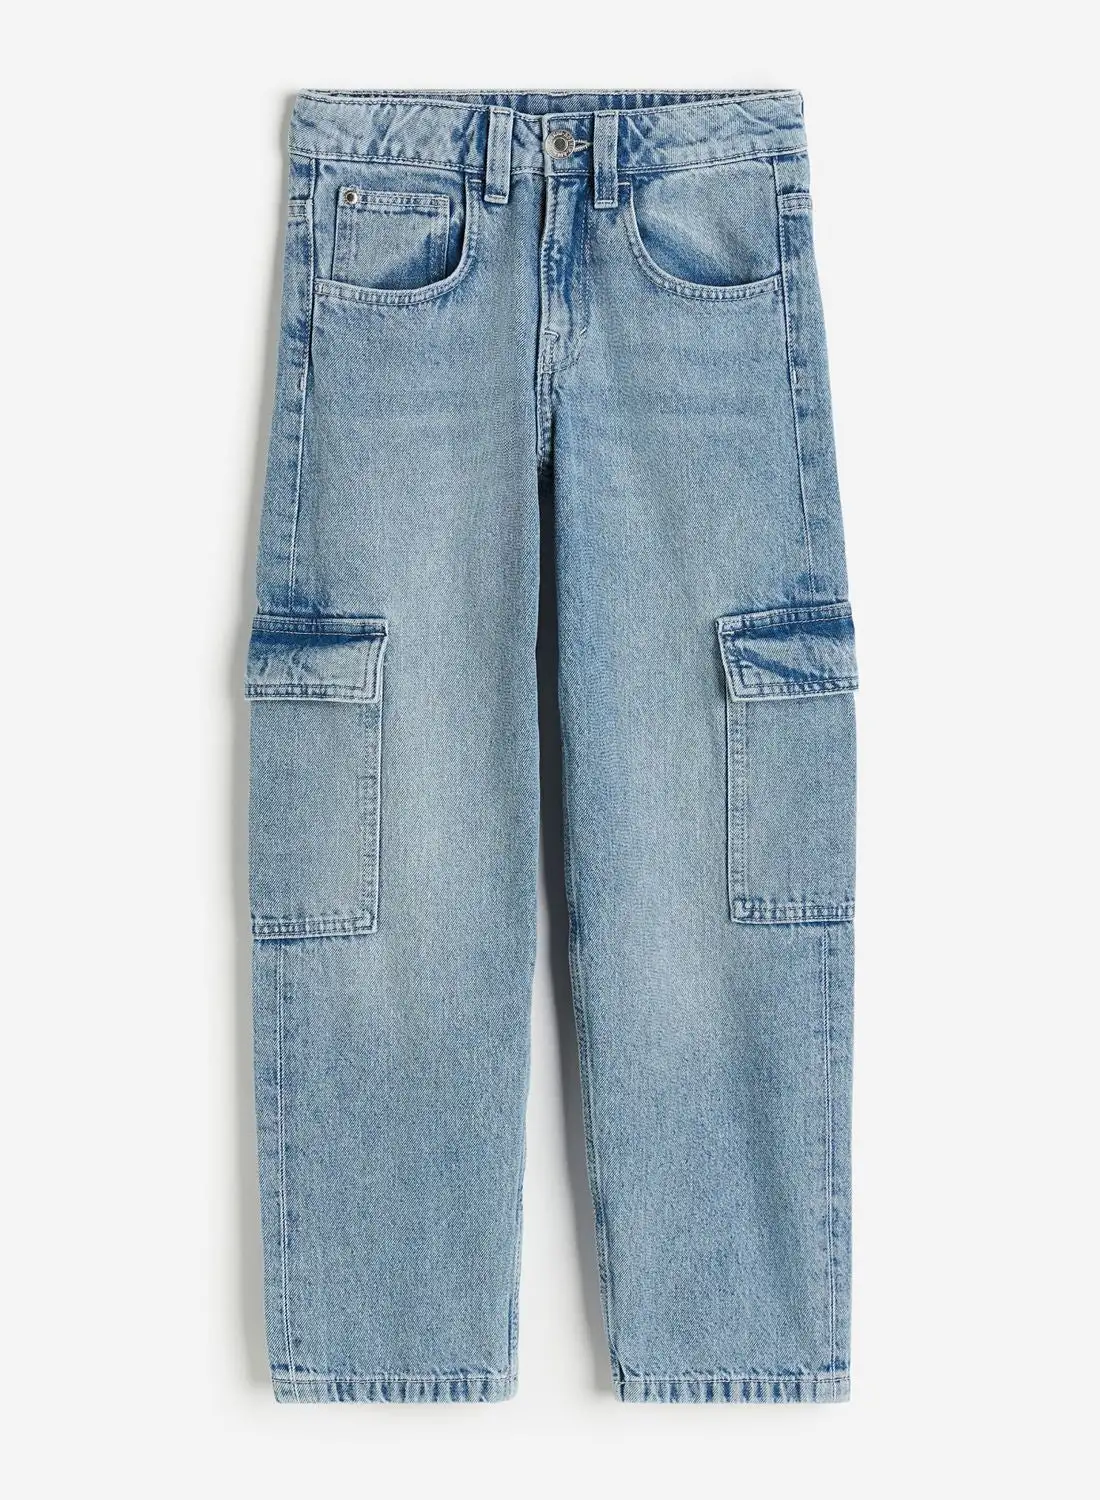 H&M Youth Loose Fit Straight Leg Jeans